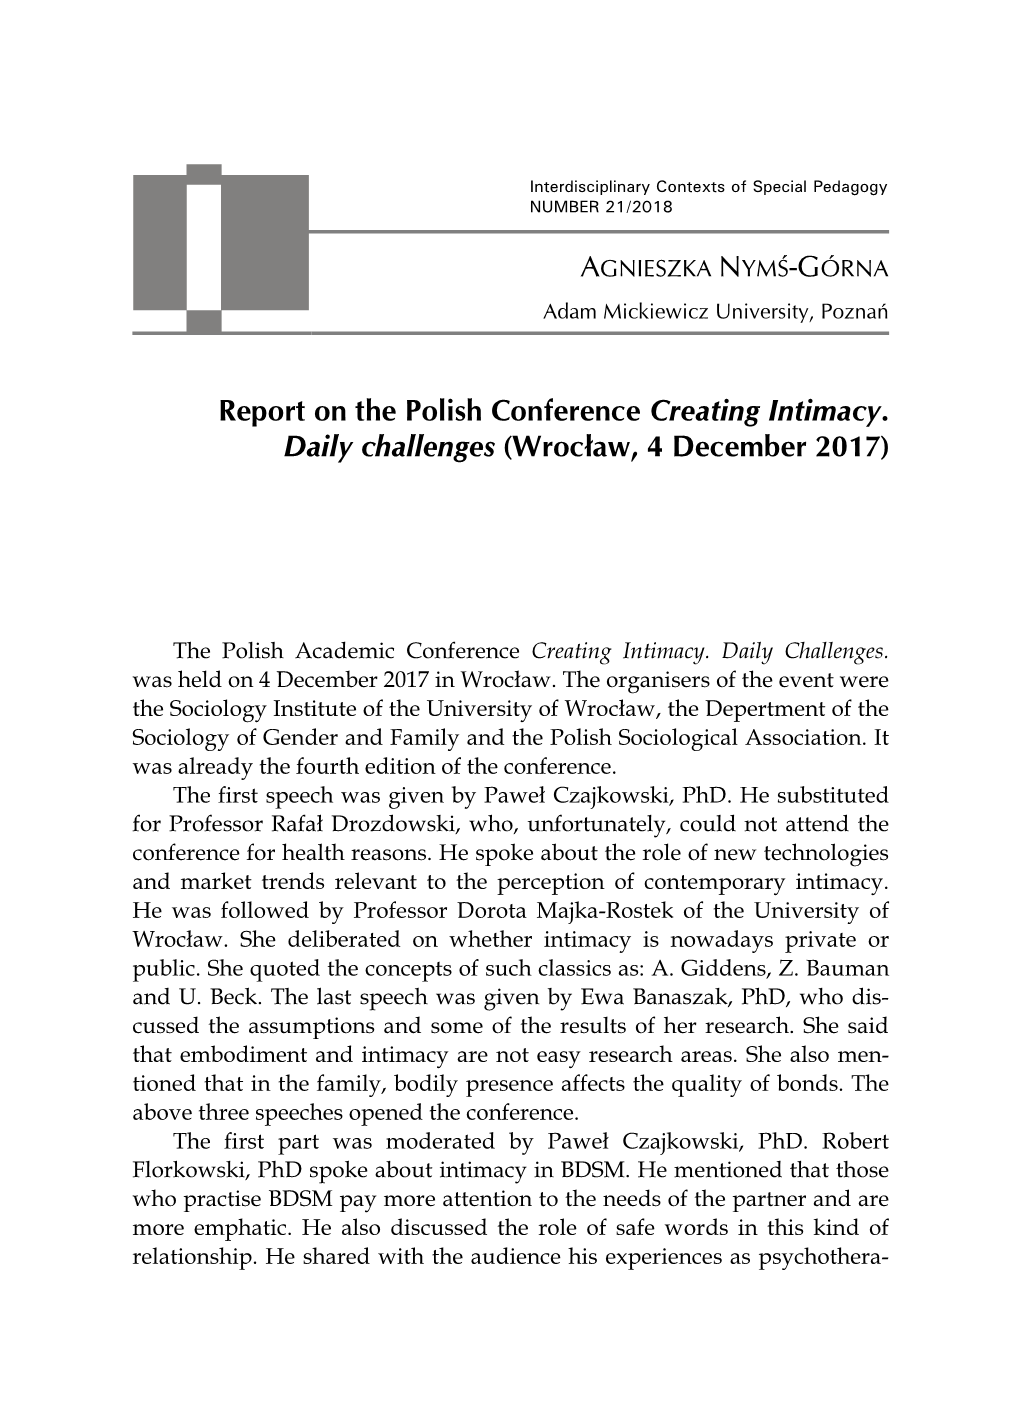 Report on the Polish Conference Creating Intimacy. Daily